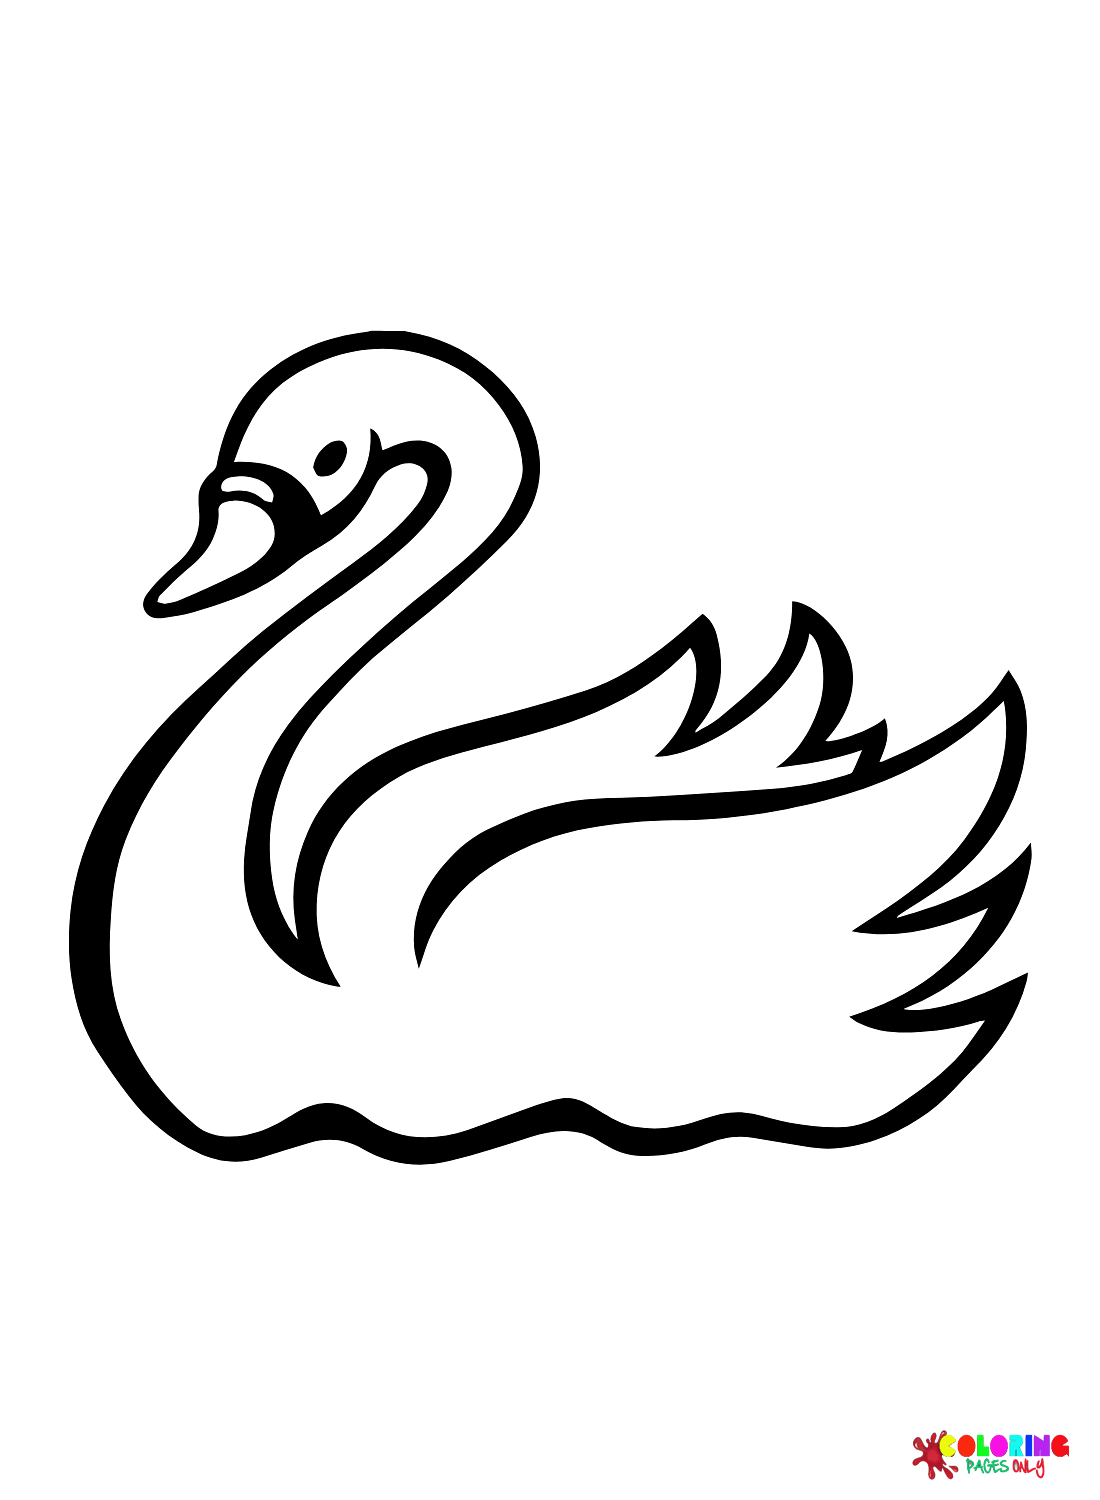 Swan Printable Coloring Page - Free Printable Coloring Pages